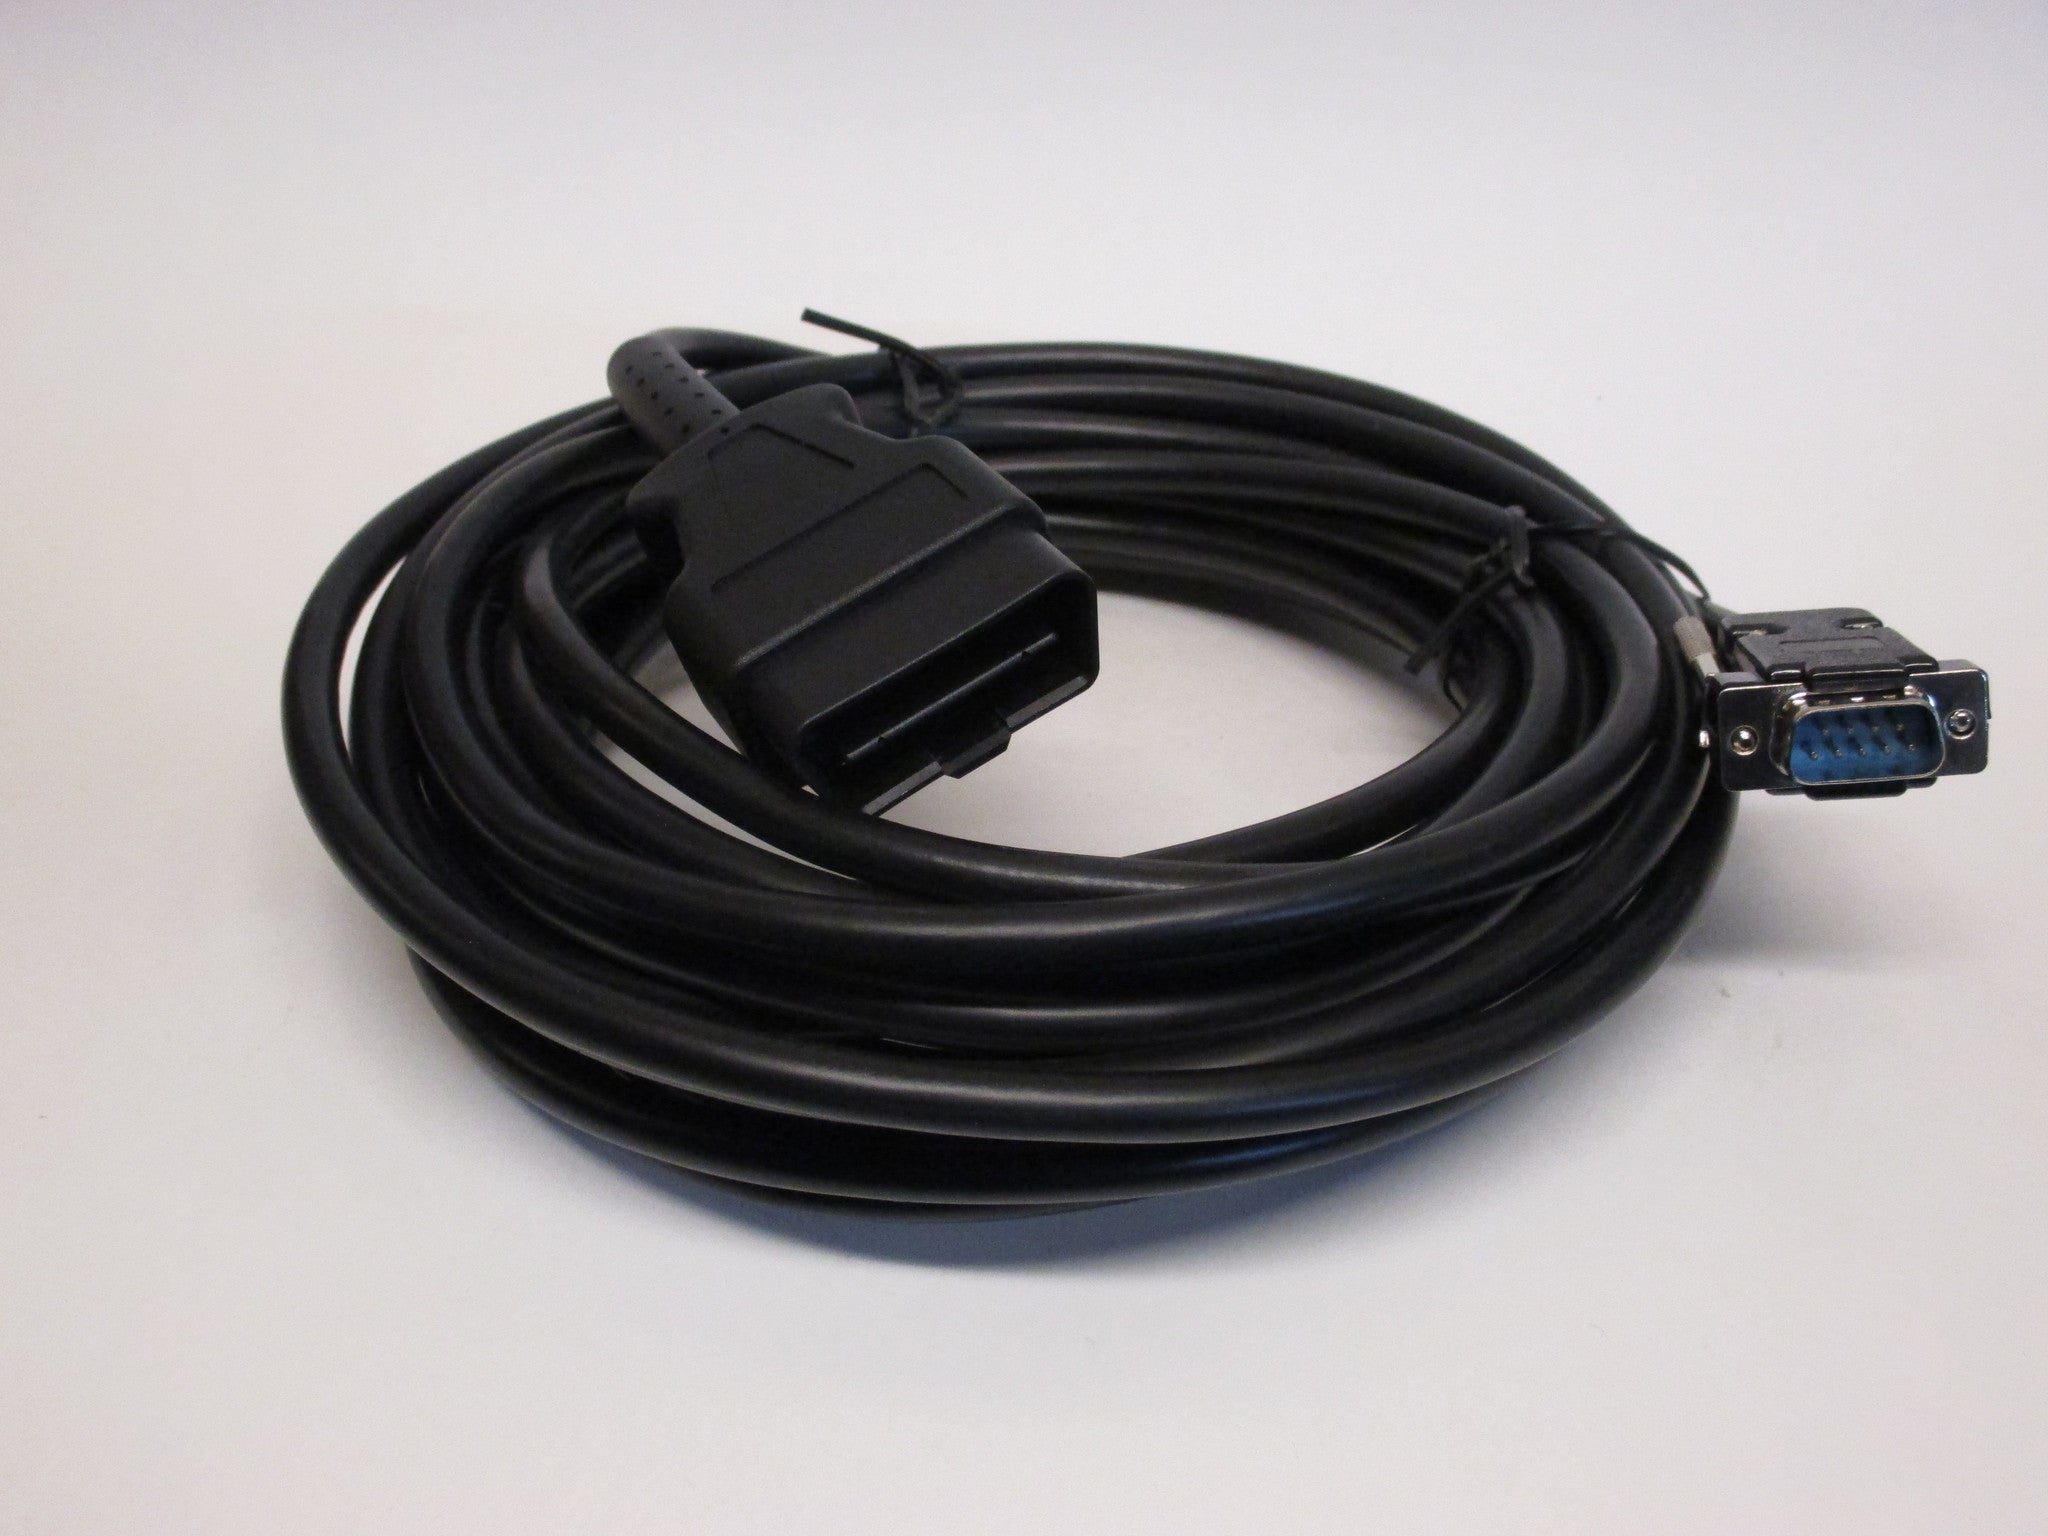 ESP B.A.R. 97 OBDII CAN CABLE, TEXAS, 25 FEET, 9 PIN MALE